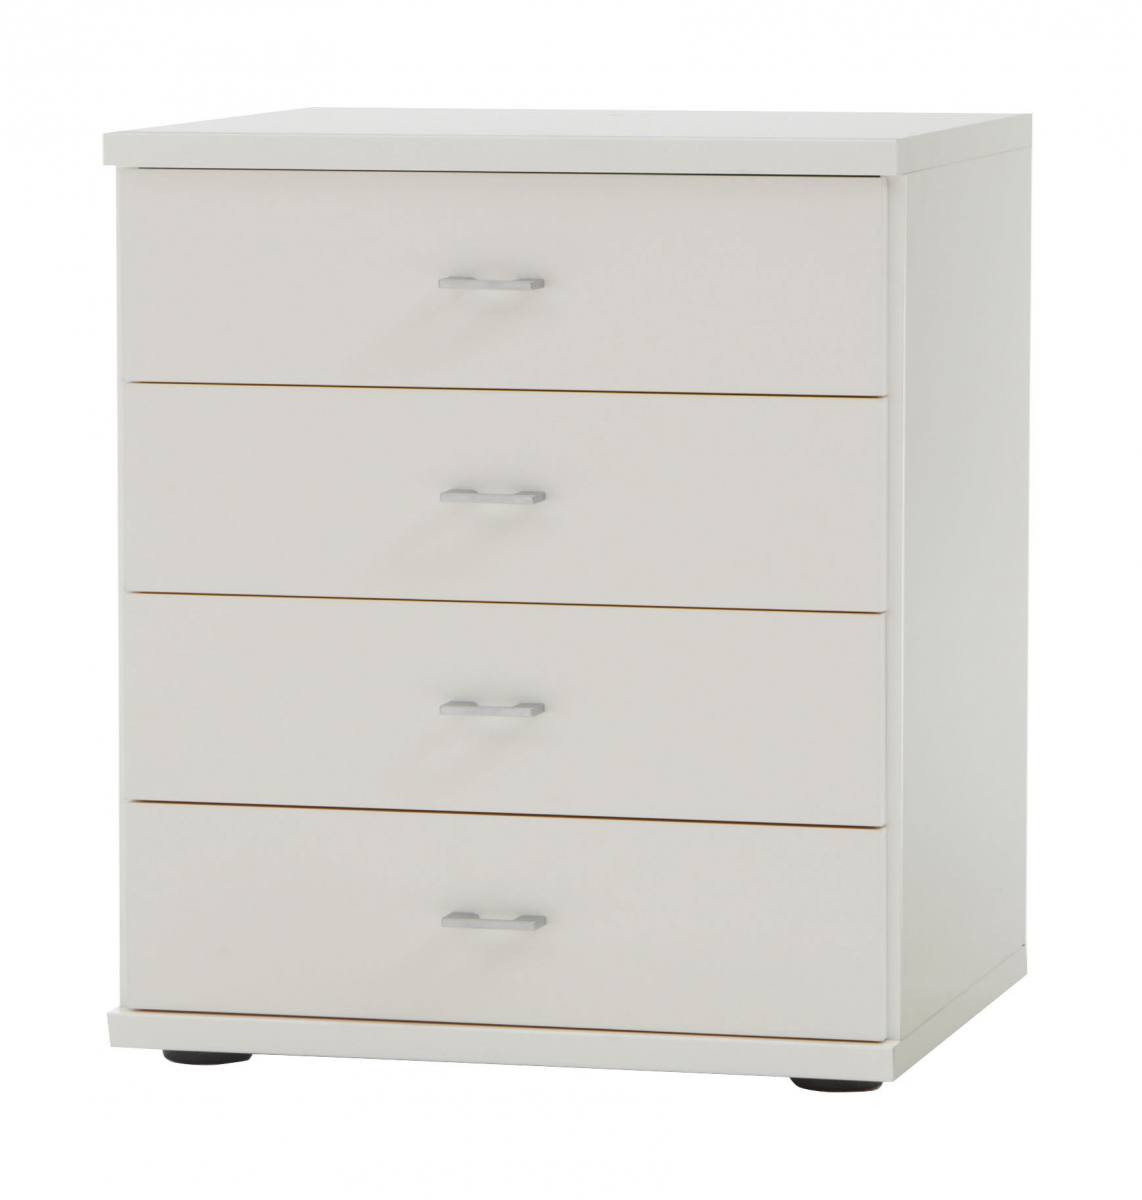 Miami Plus 4 Drawer Mirrored Wide Chest, Width 75cm